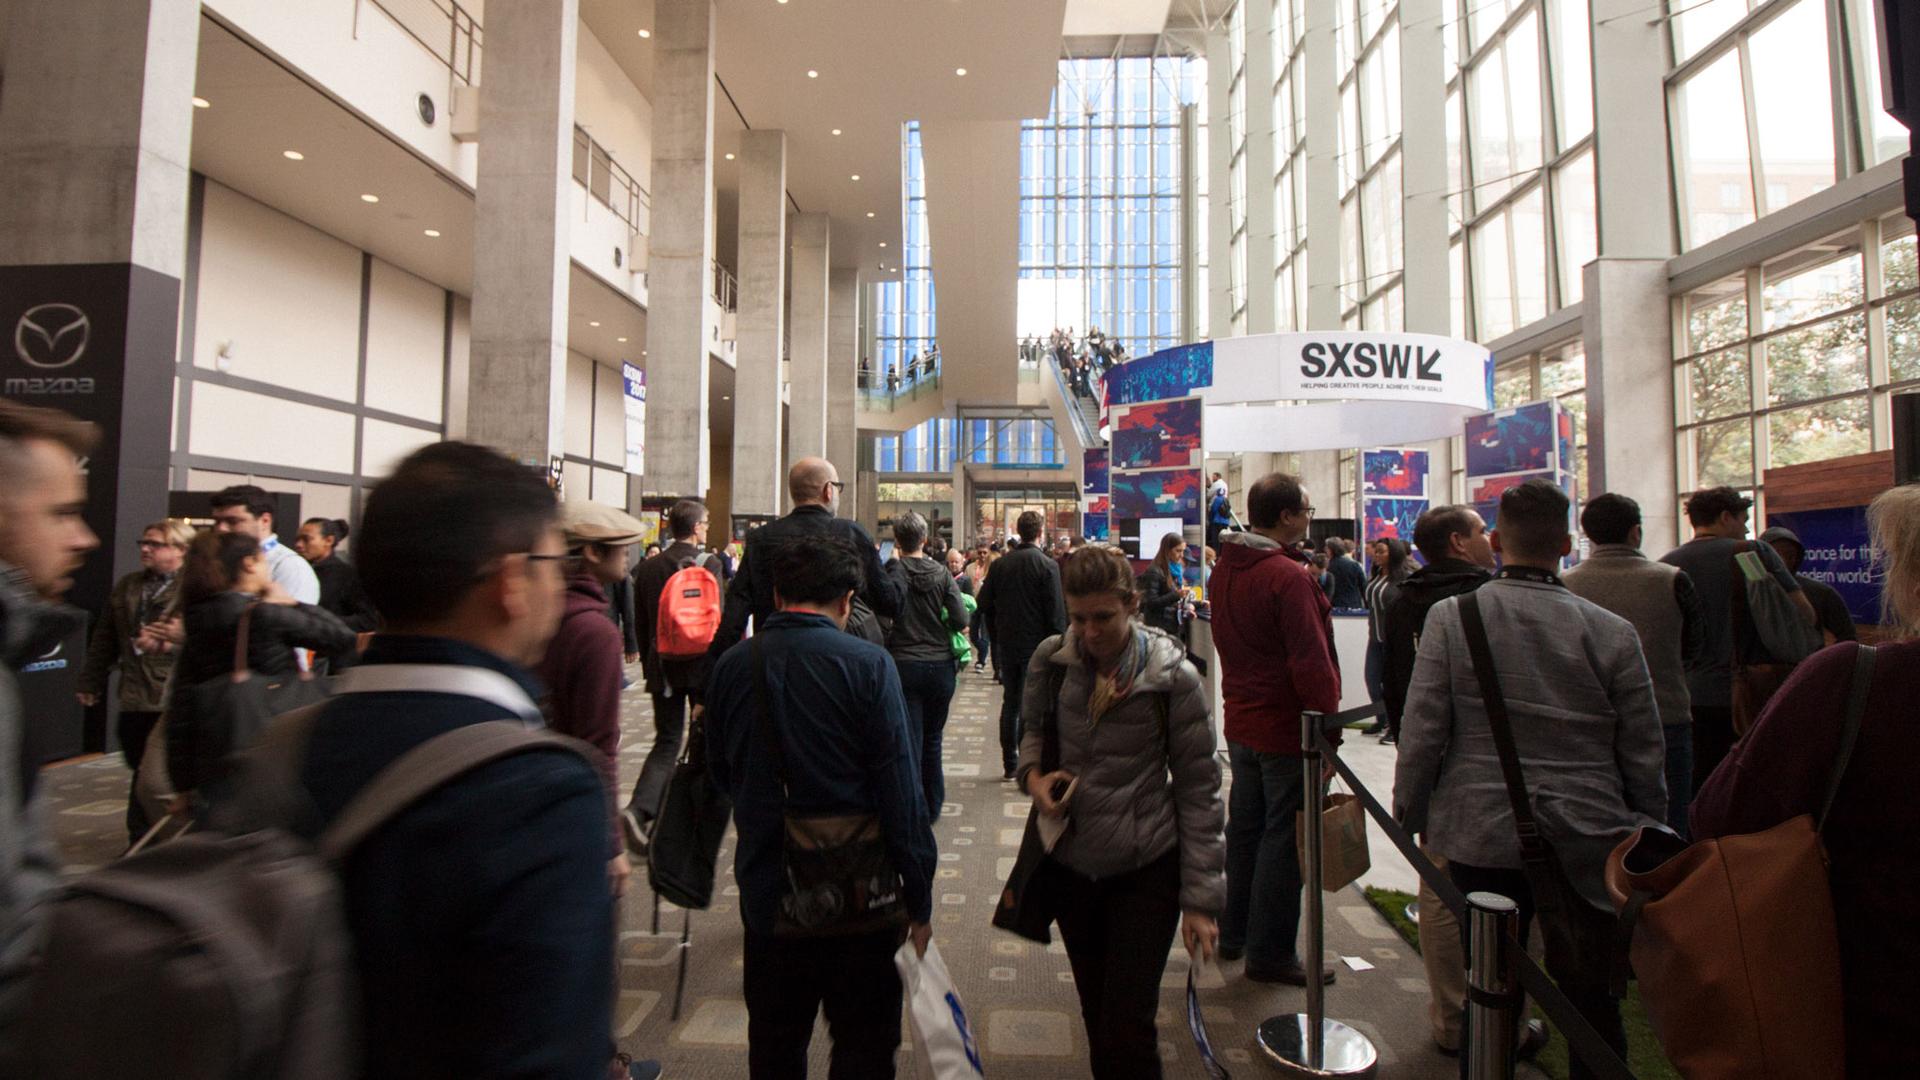 Attendees of SXSW Interactive pass through the halls inside the Austin Convention Center.